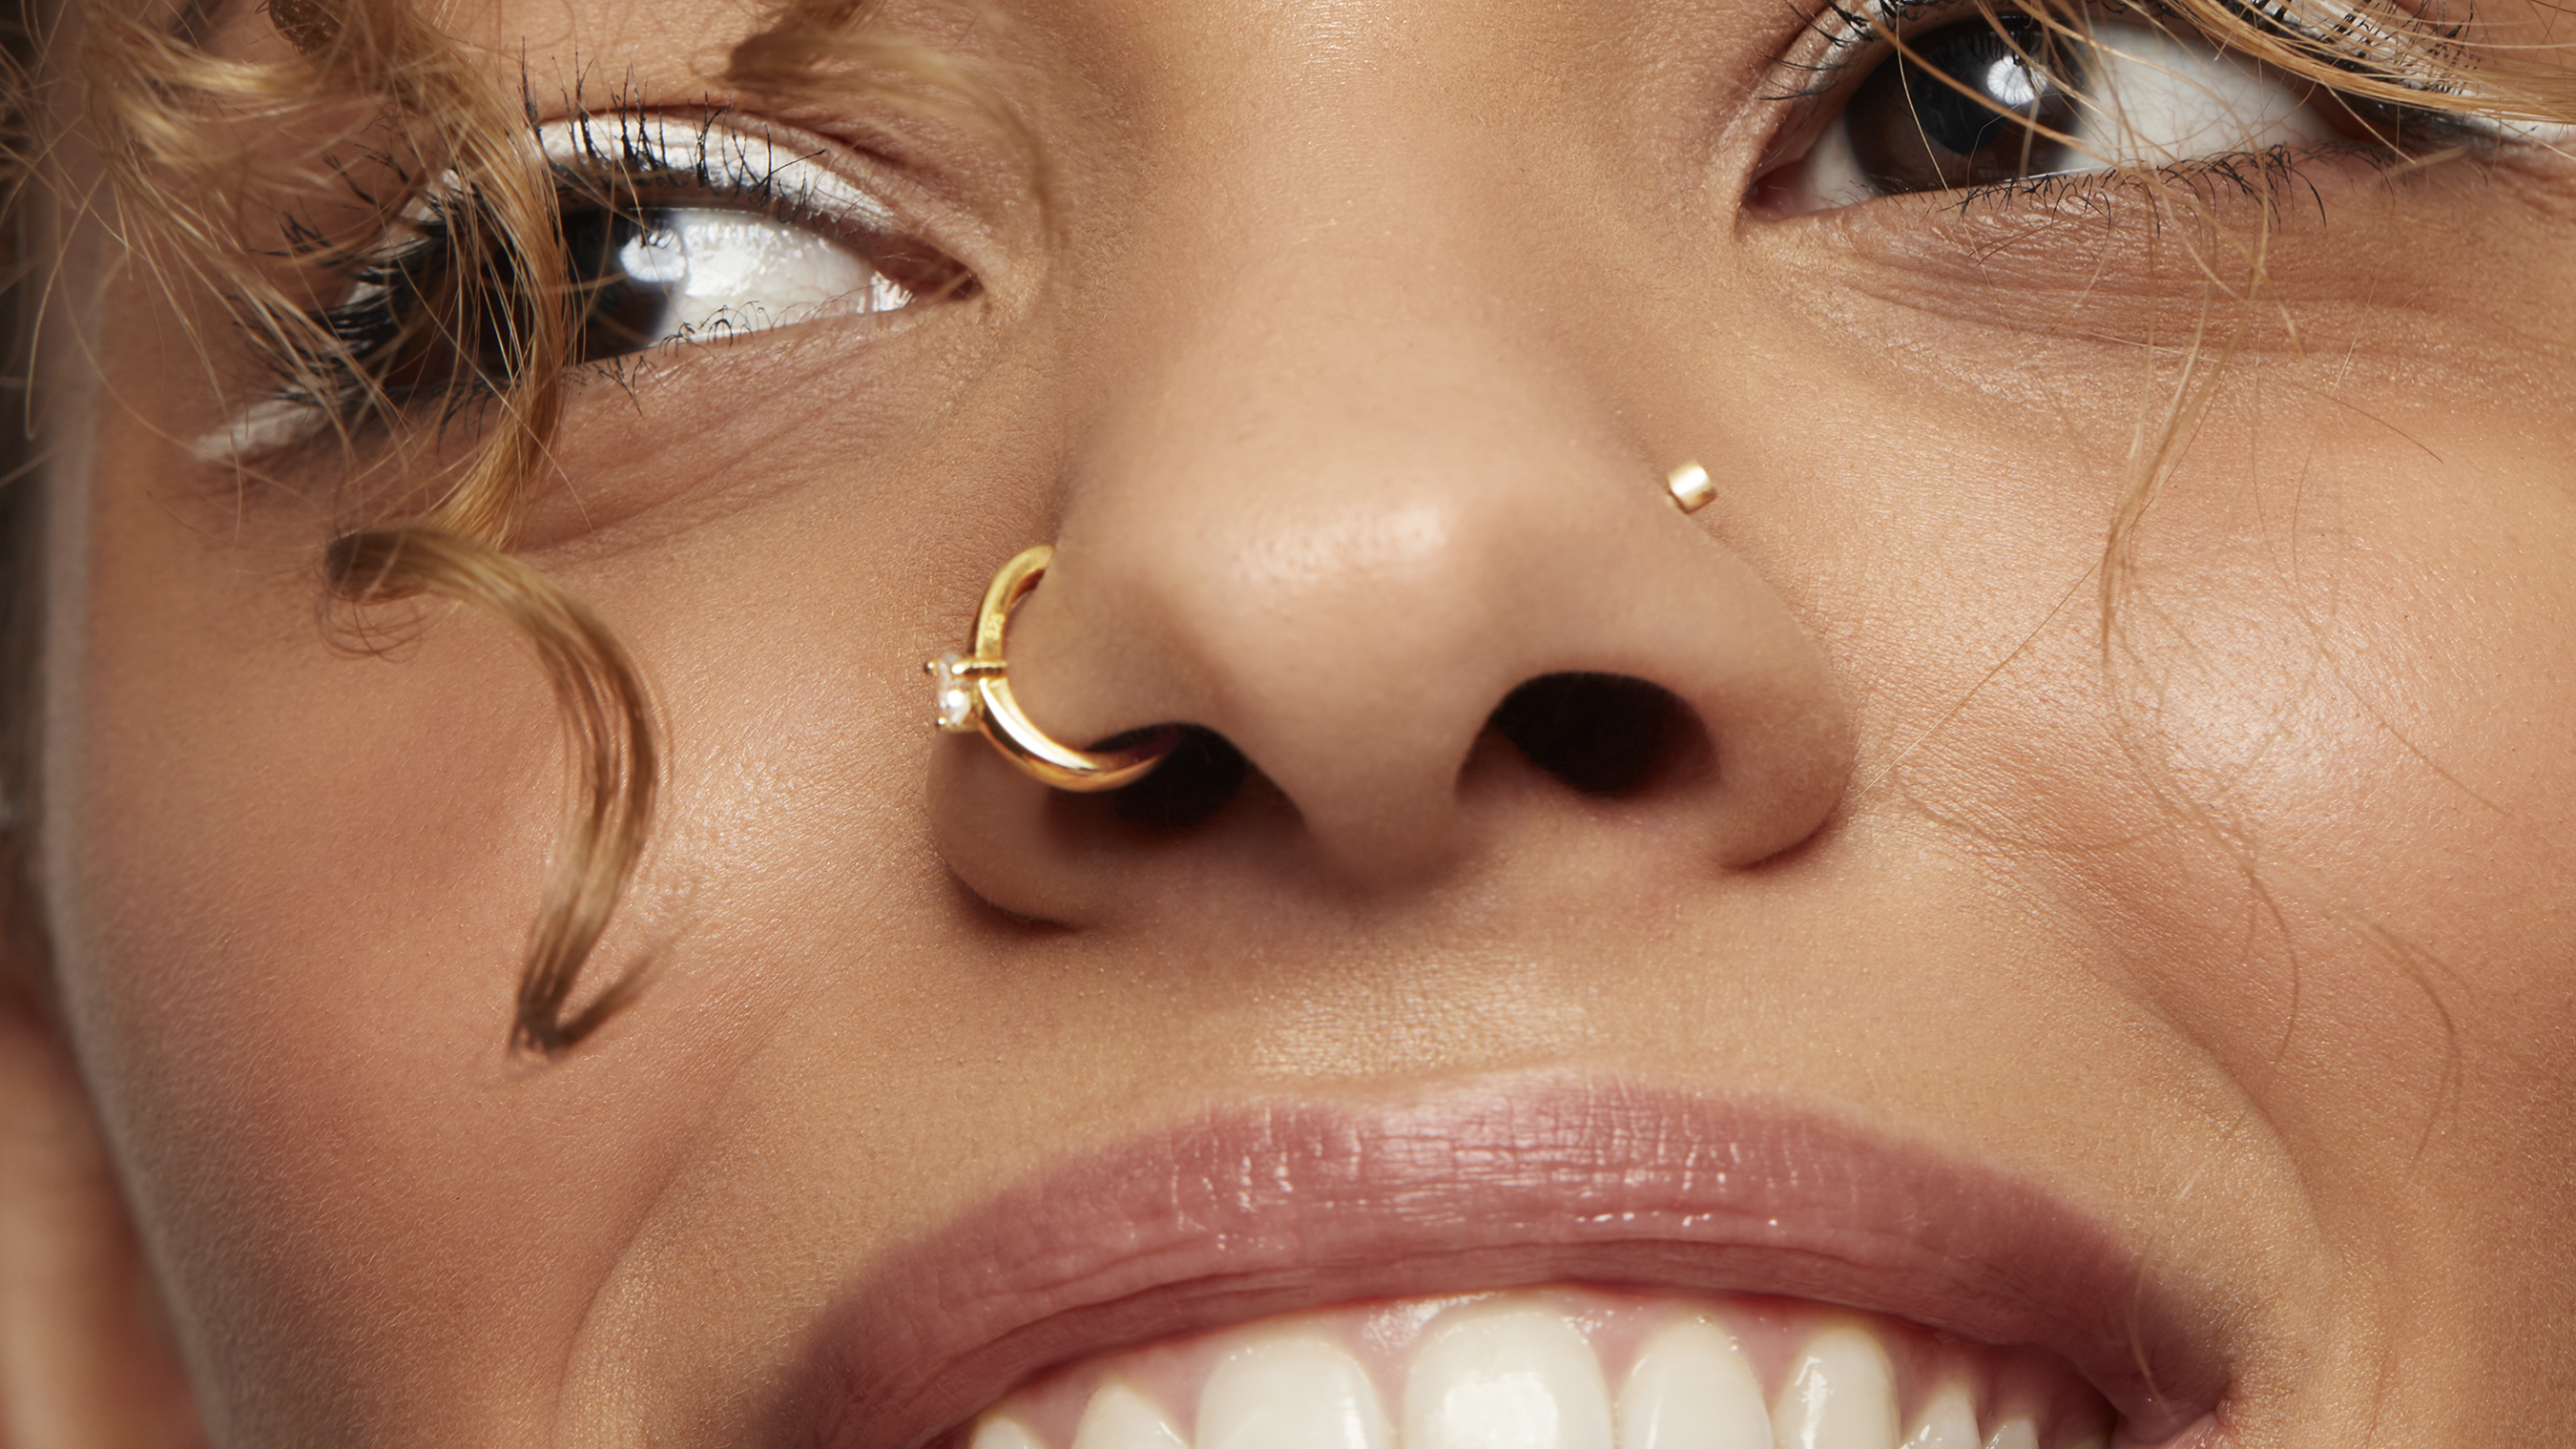 The Ear and Nose Piercing Trend of 2020 Is Here to Stay photo